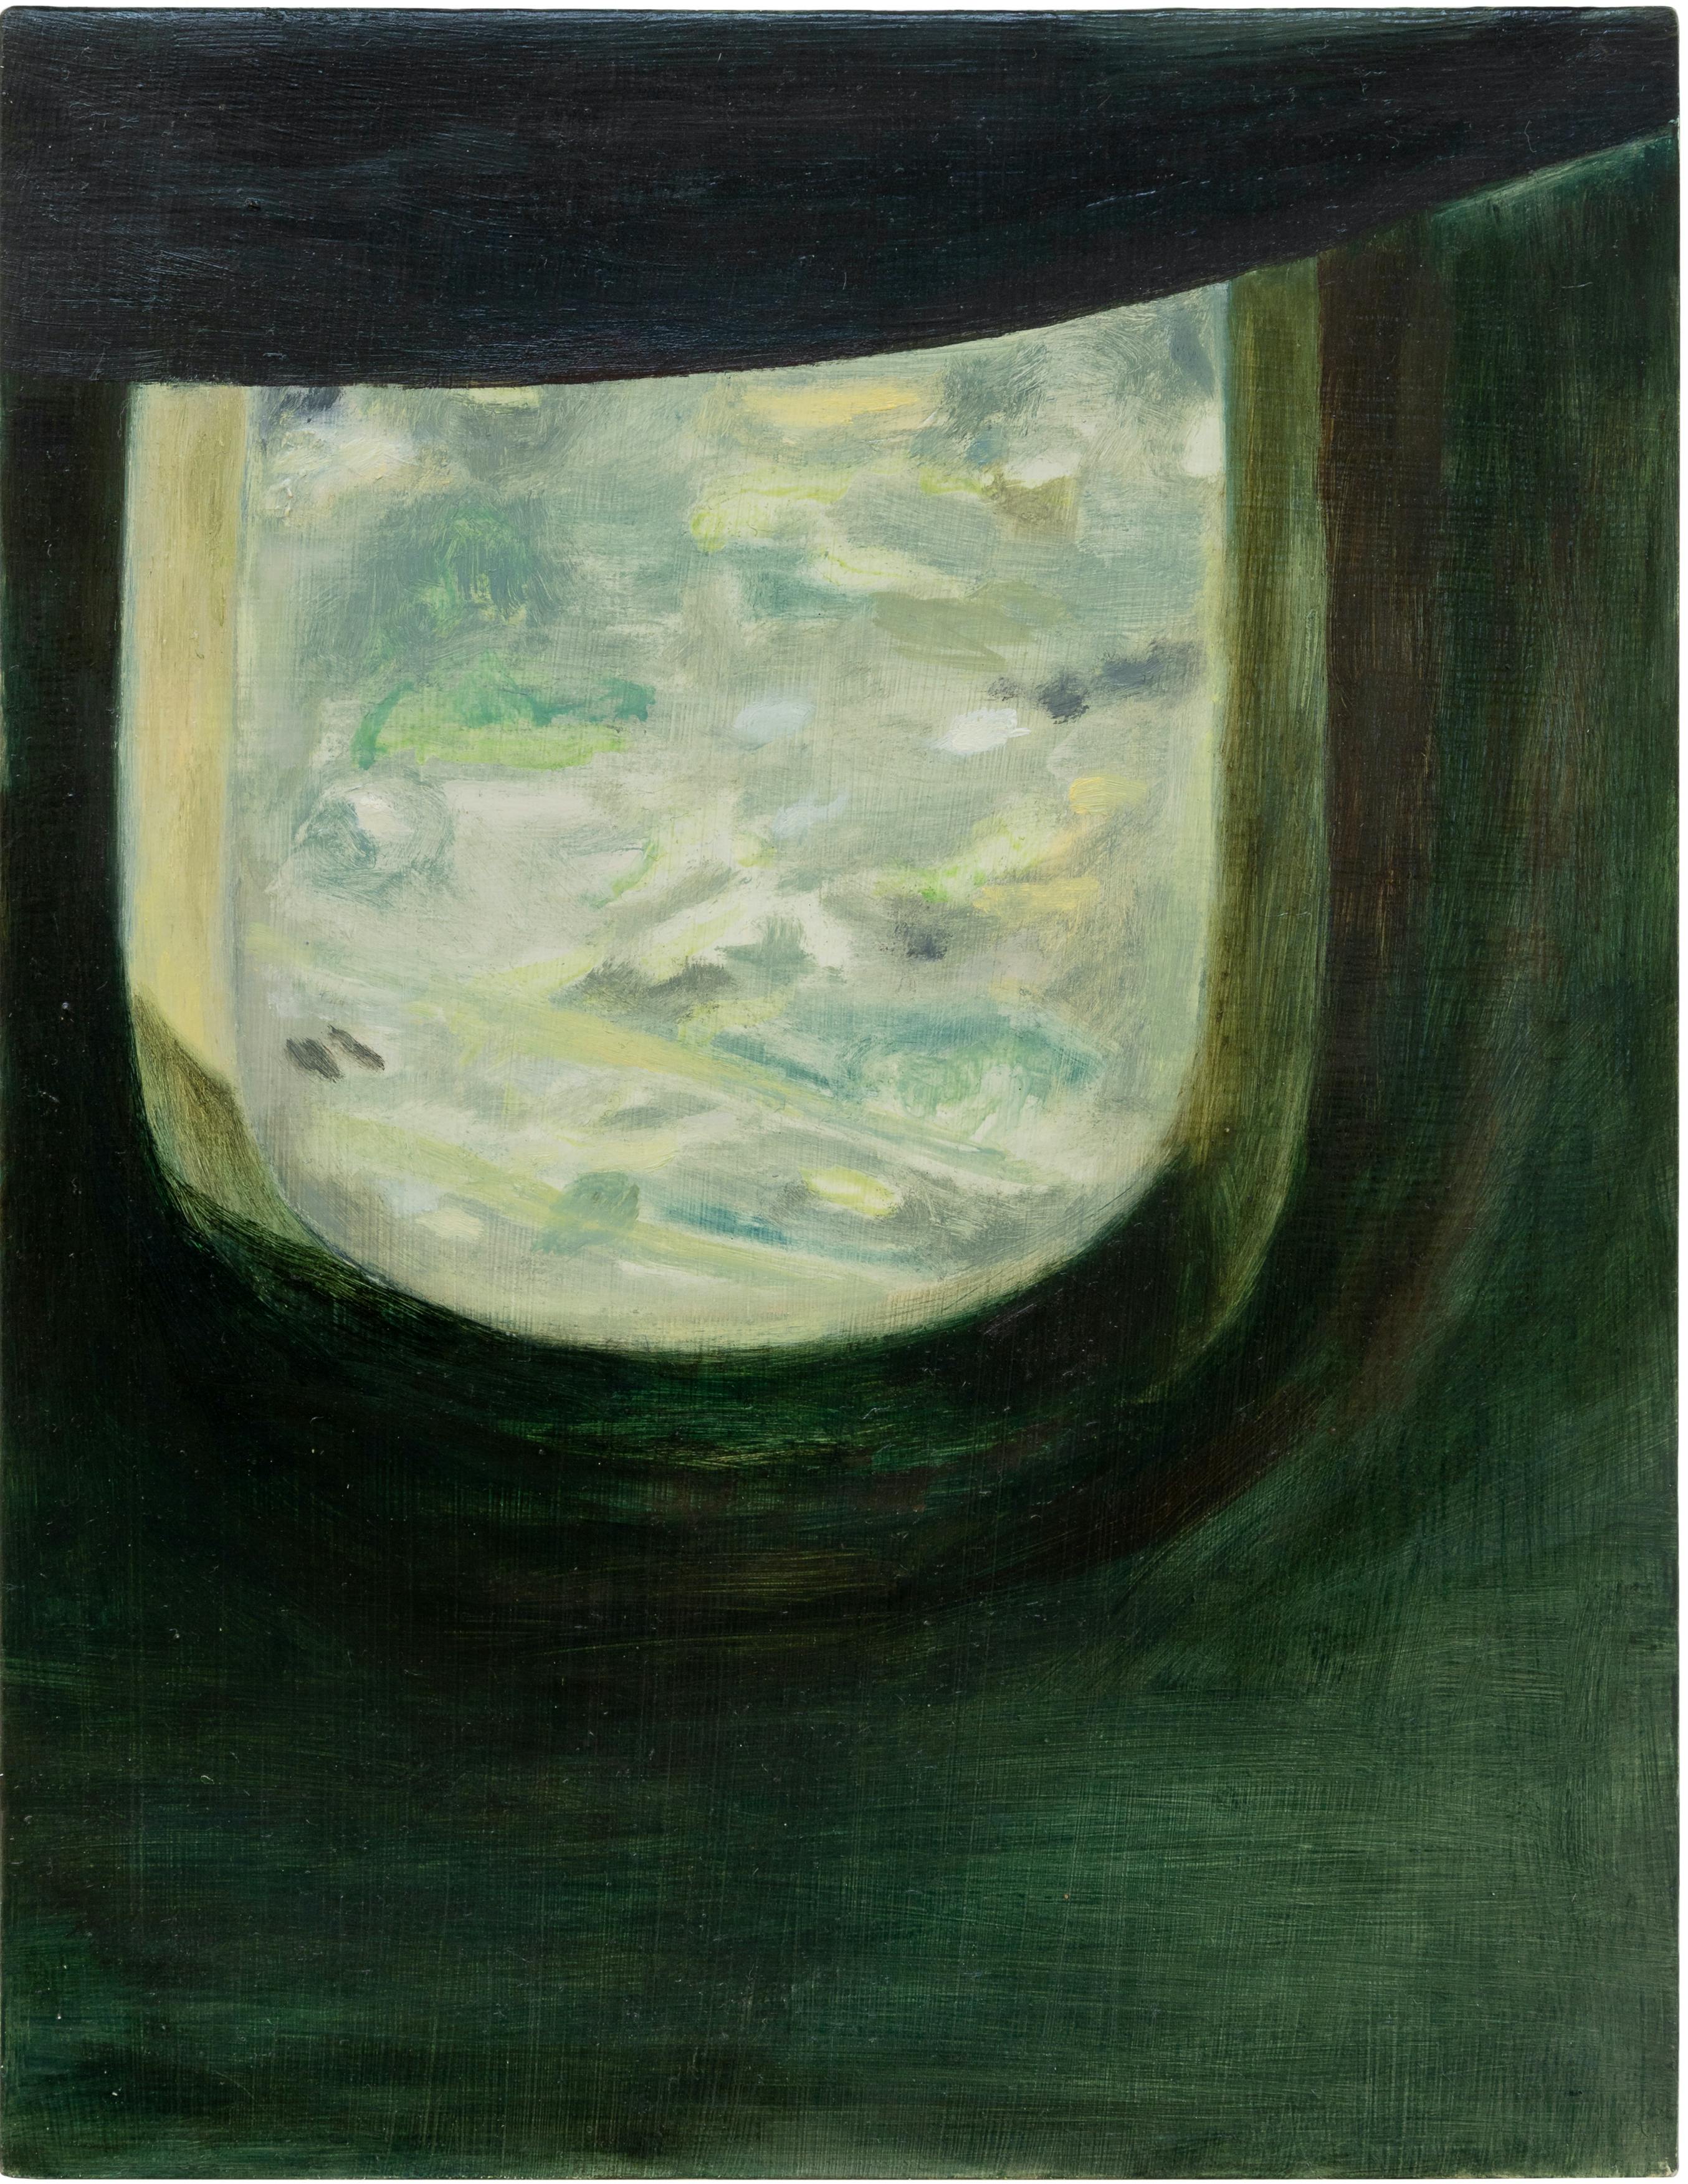 View from the Plane, 2020. Oil on board, 18 x 23.5cm